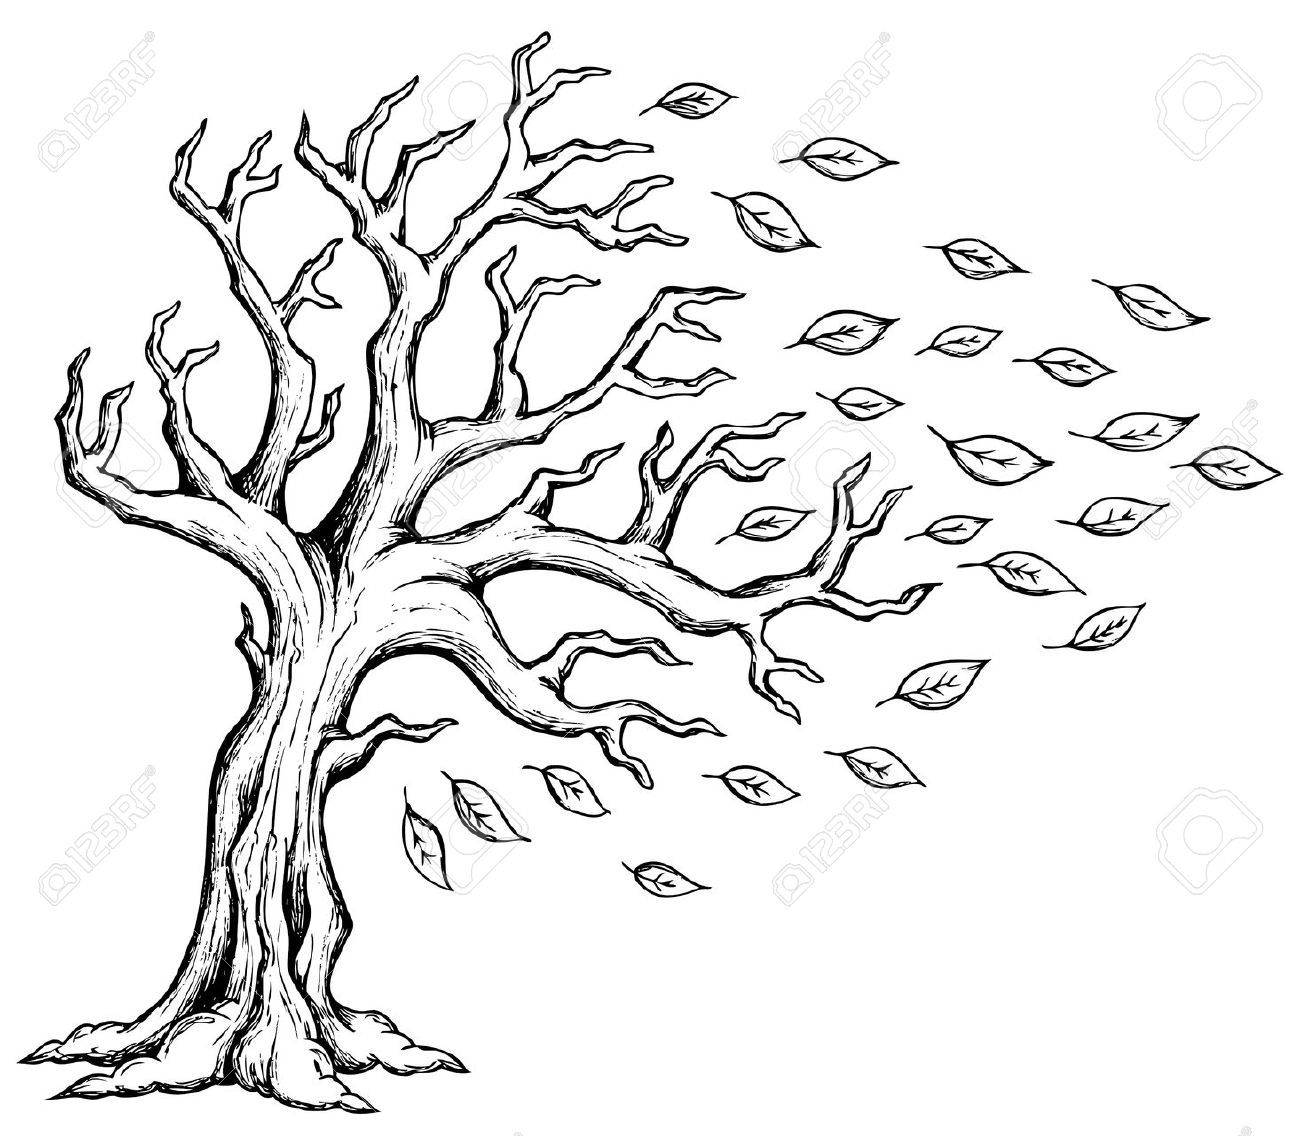 Windy clipart sketch. Wind blowing trees drawing